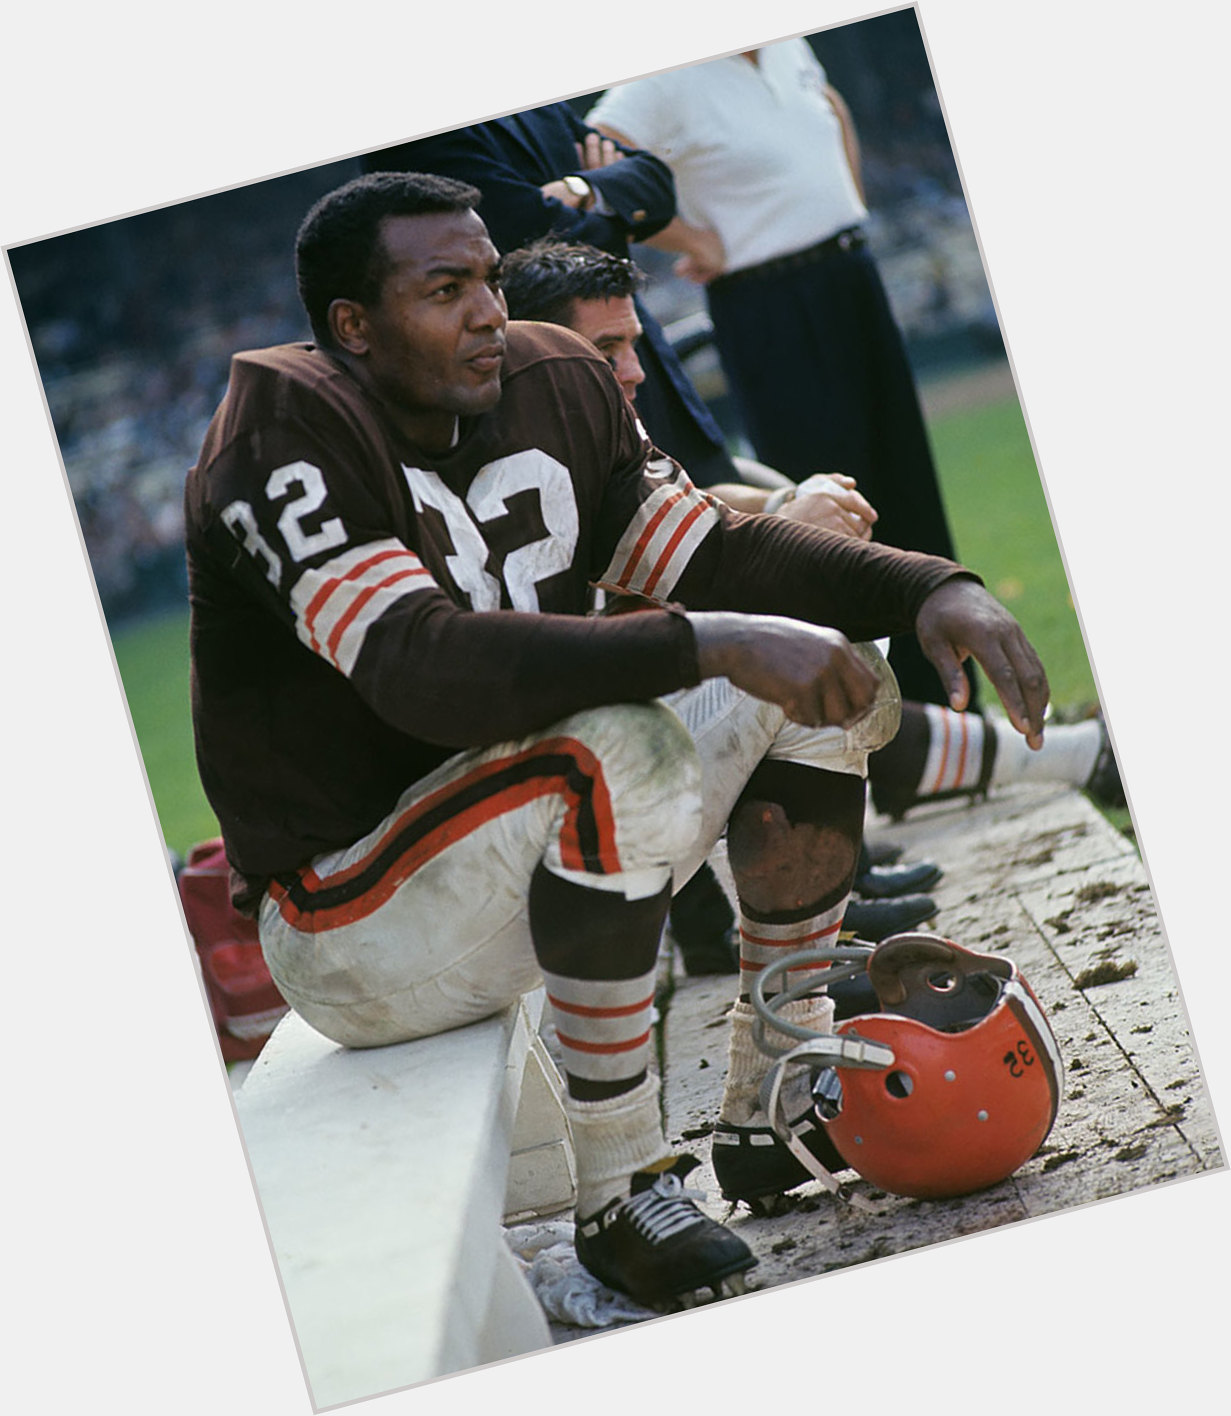 Jim Brown Happy Birthday
The Greatest also played baseball 